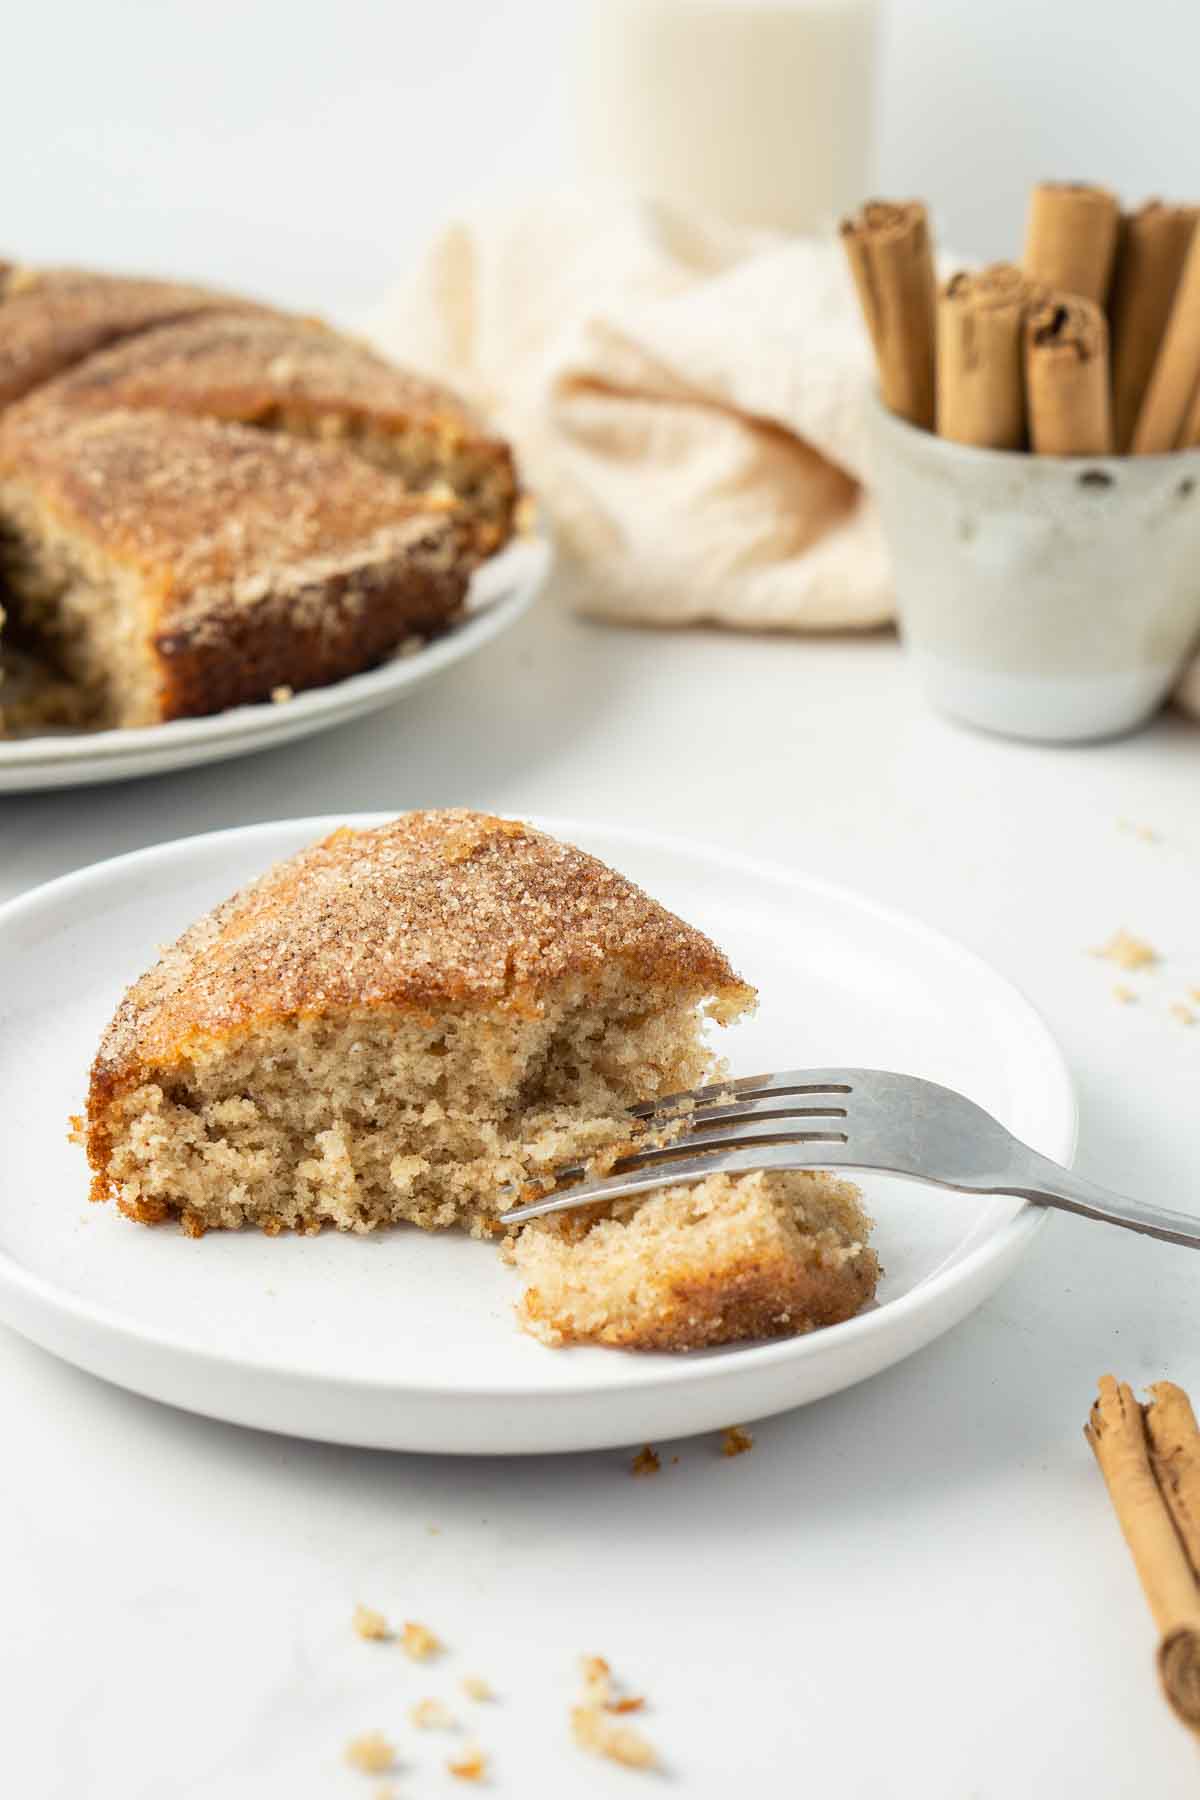 Slice of cinnamon tea cake on a plate with a fork.